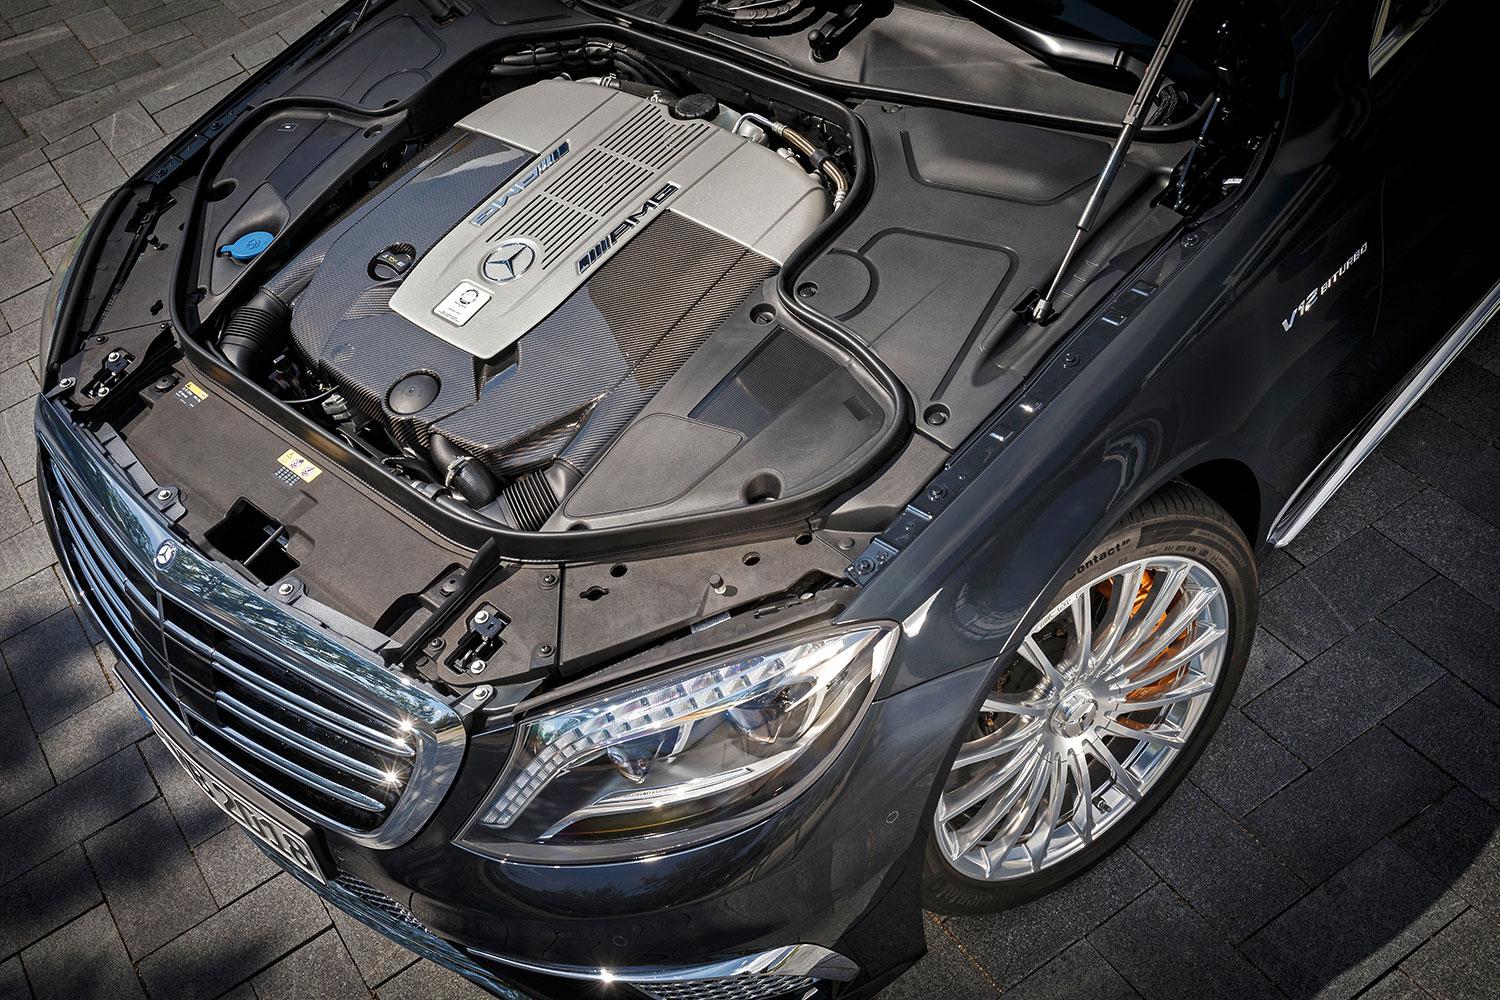 2015 Mercedes_Benz S65 AMG engine top view